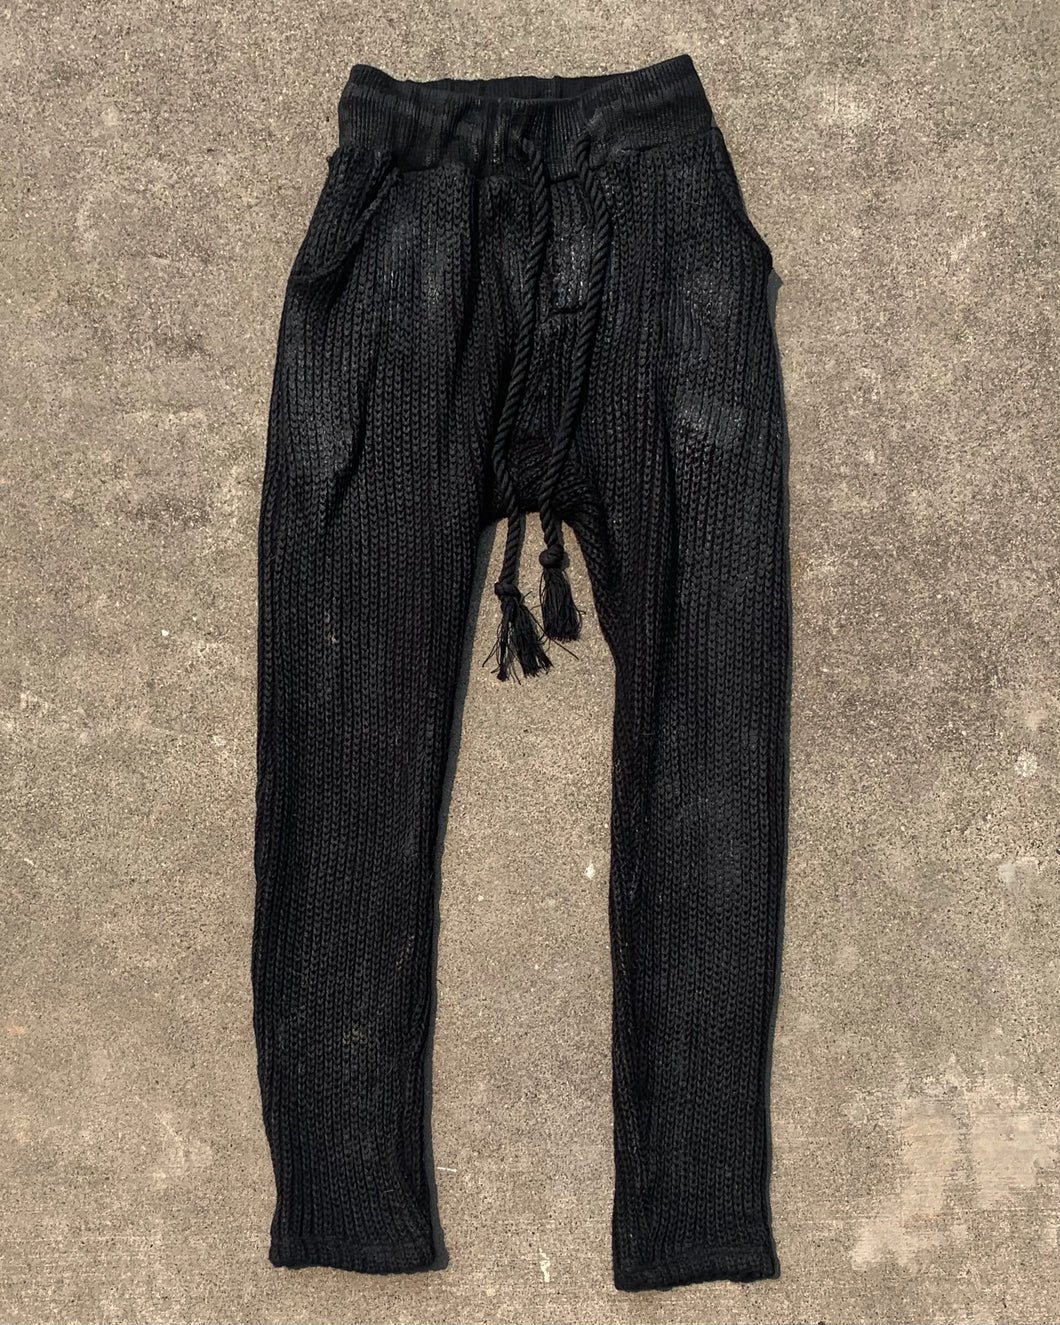 Stretchy Woven Wool Black Painted Pants